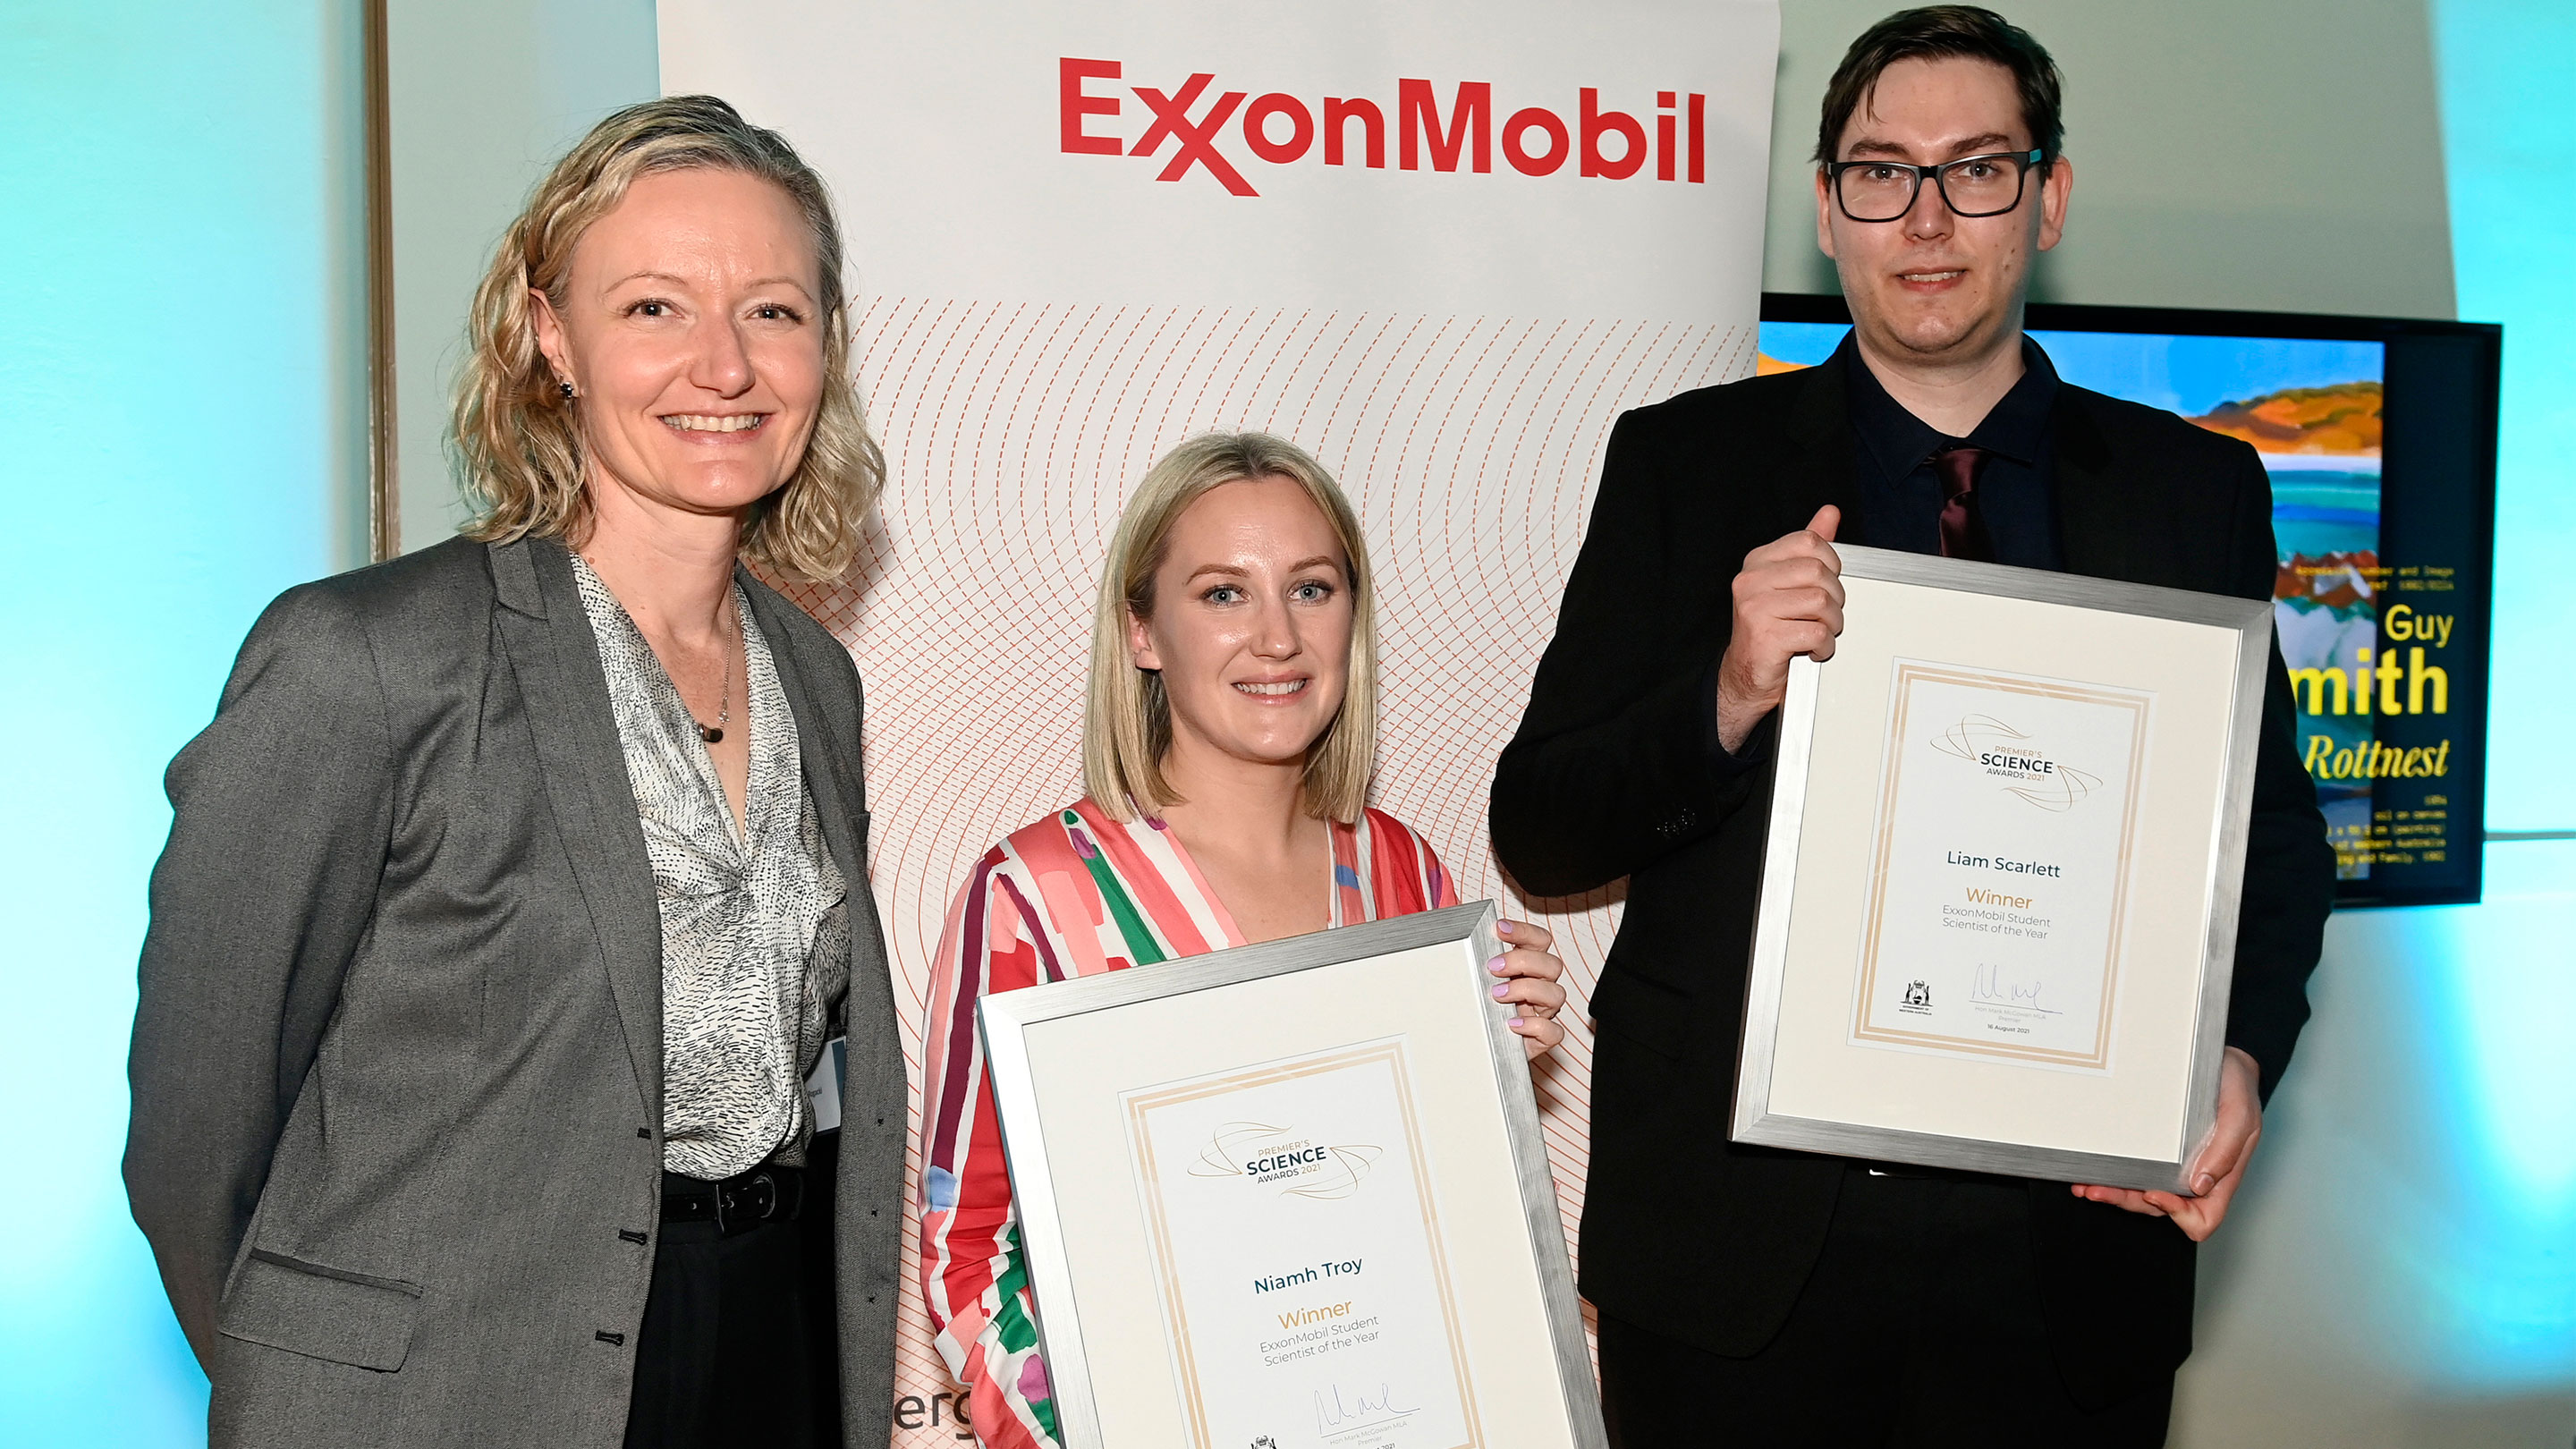 Image Margaret Rogacki, ExxonMobil Australia LNG General Manager (far left) had the privilege of presenting 2021 ExxonMobil Student Scientists of the Year Niamh (centre) and Liam (right) with their WA Premier's Science Awards during National Science Week.